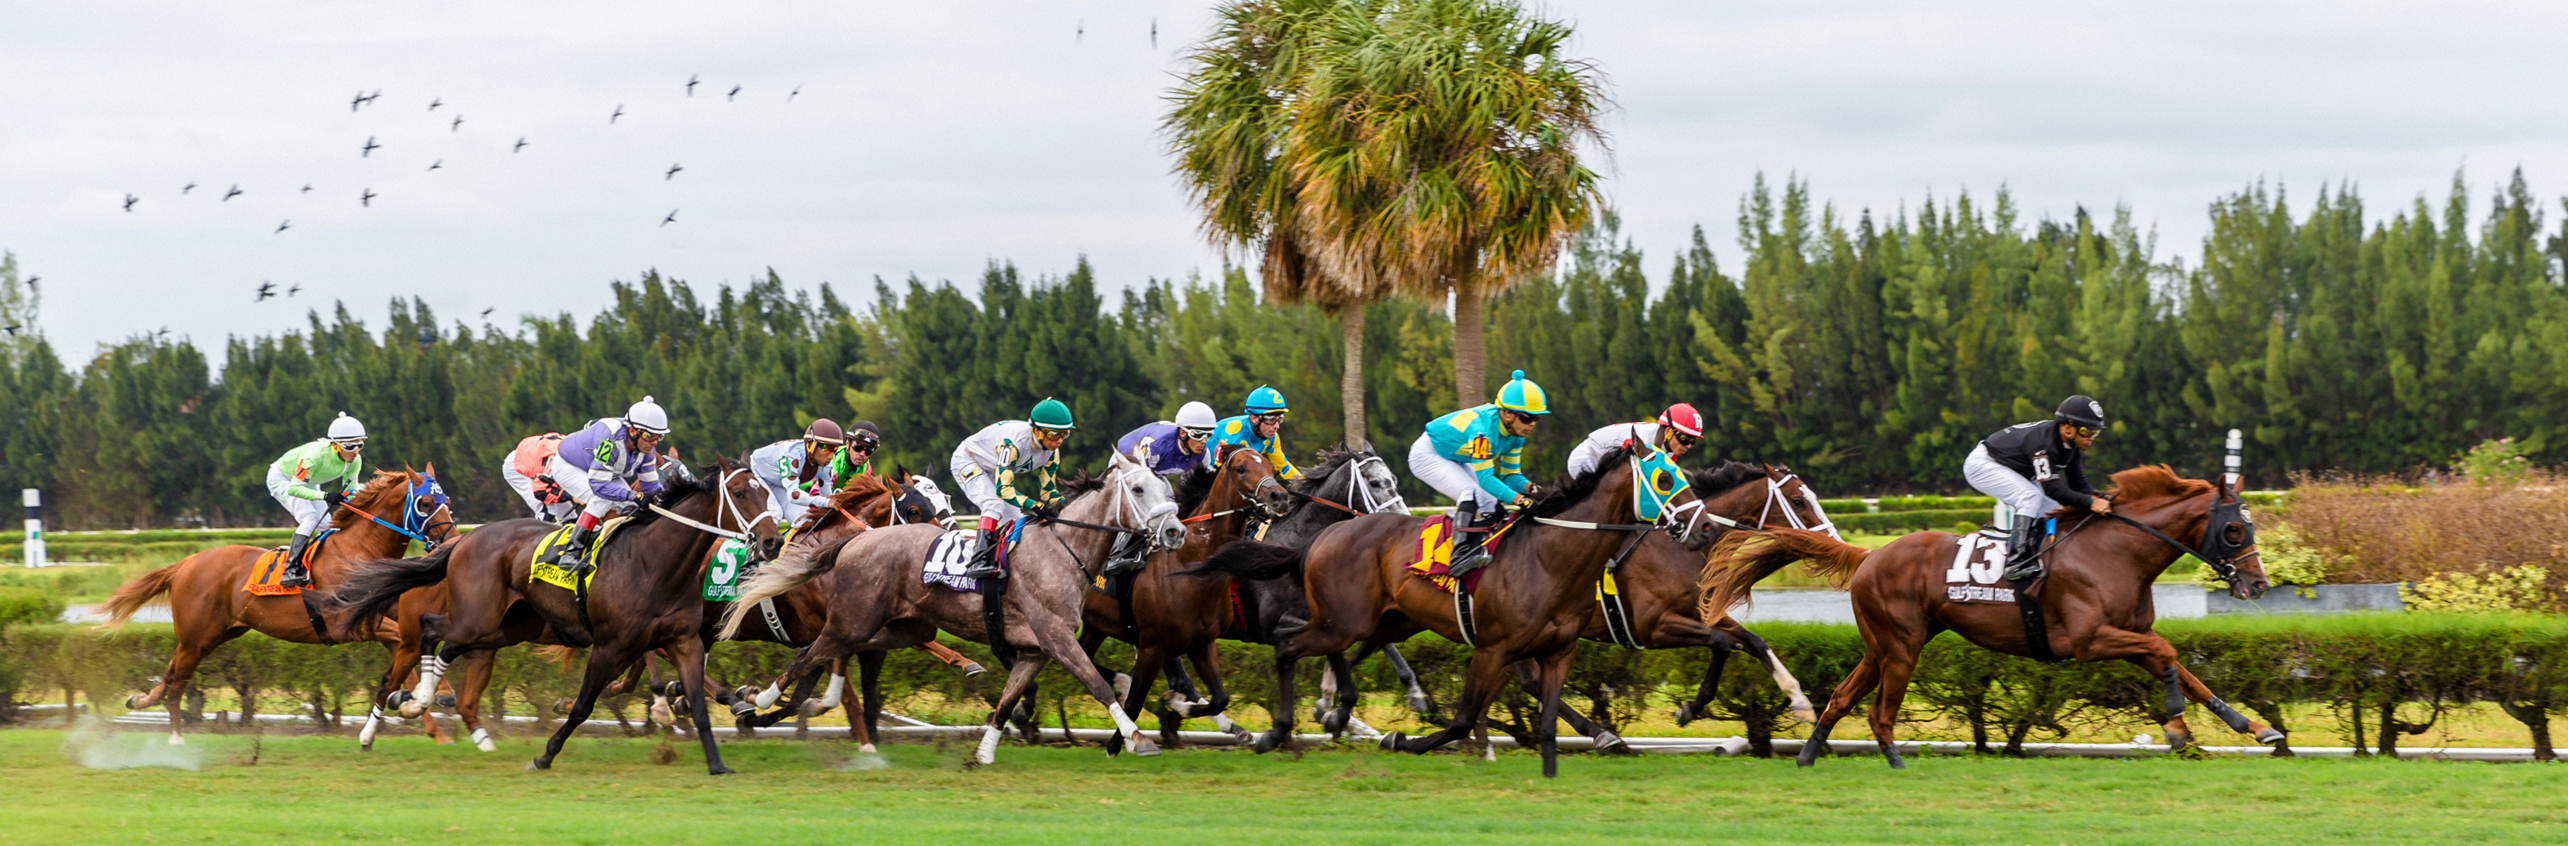 Pegasus World Cup at Gulfstream Park